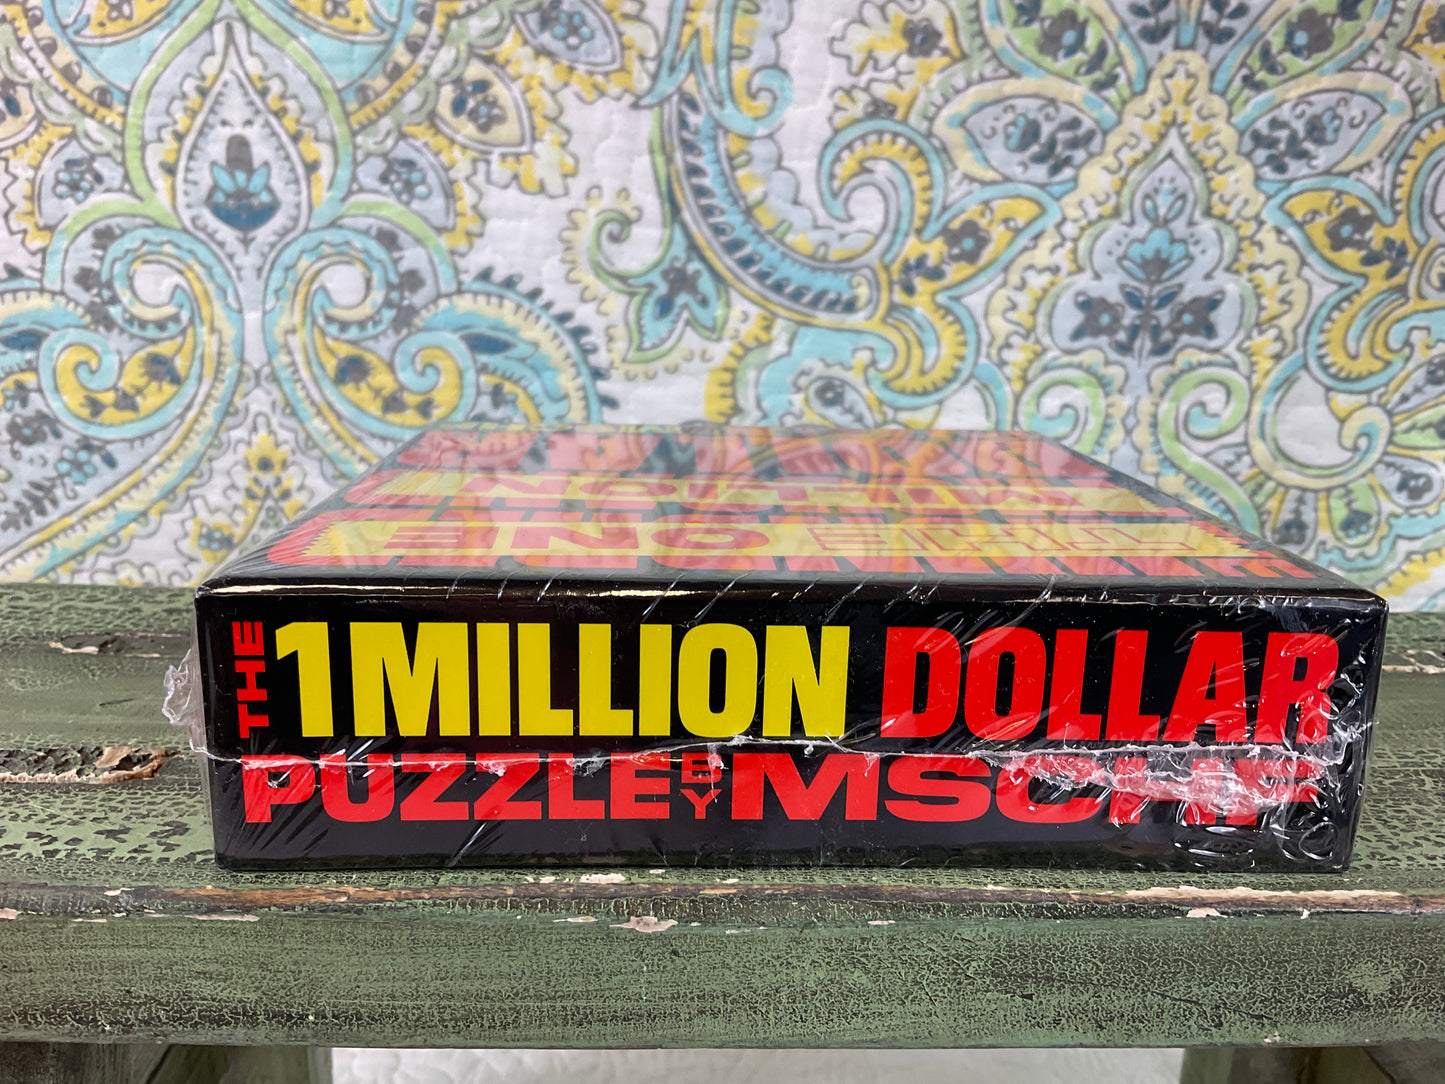 The One Million Dollar Puzzle by Mschf